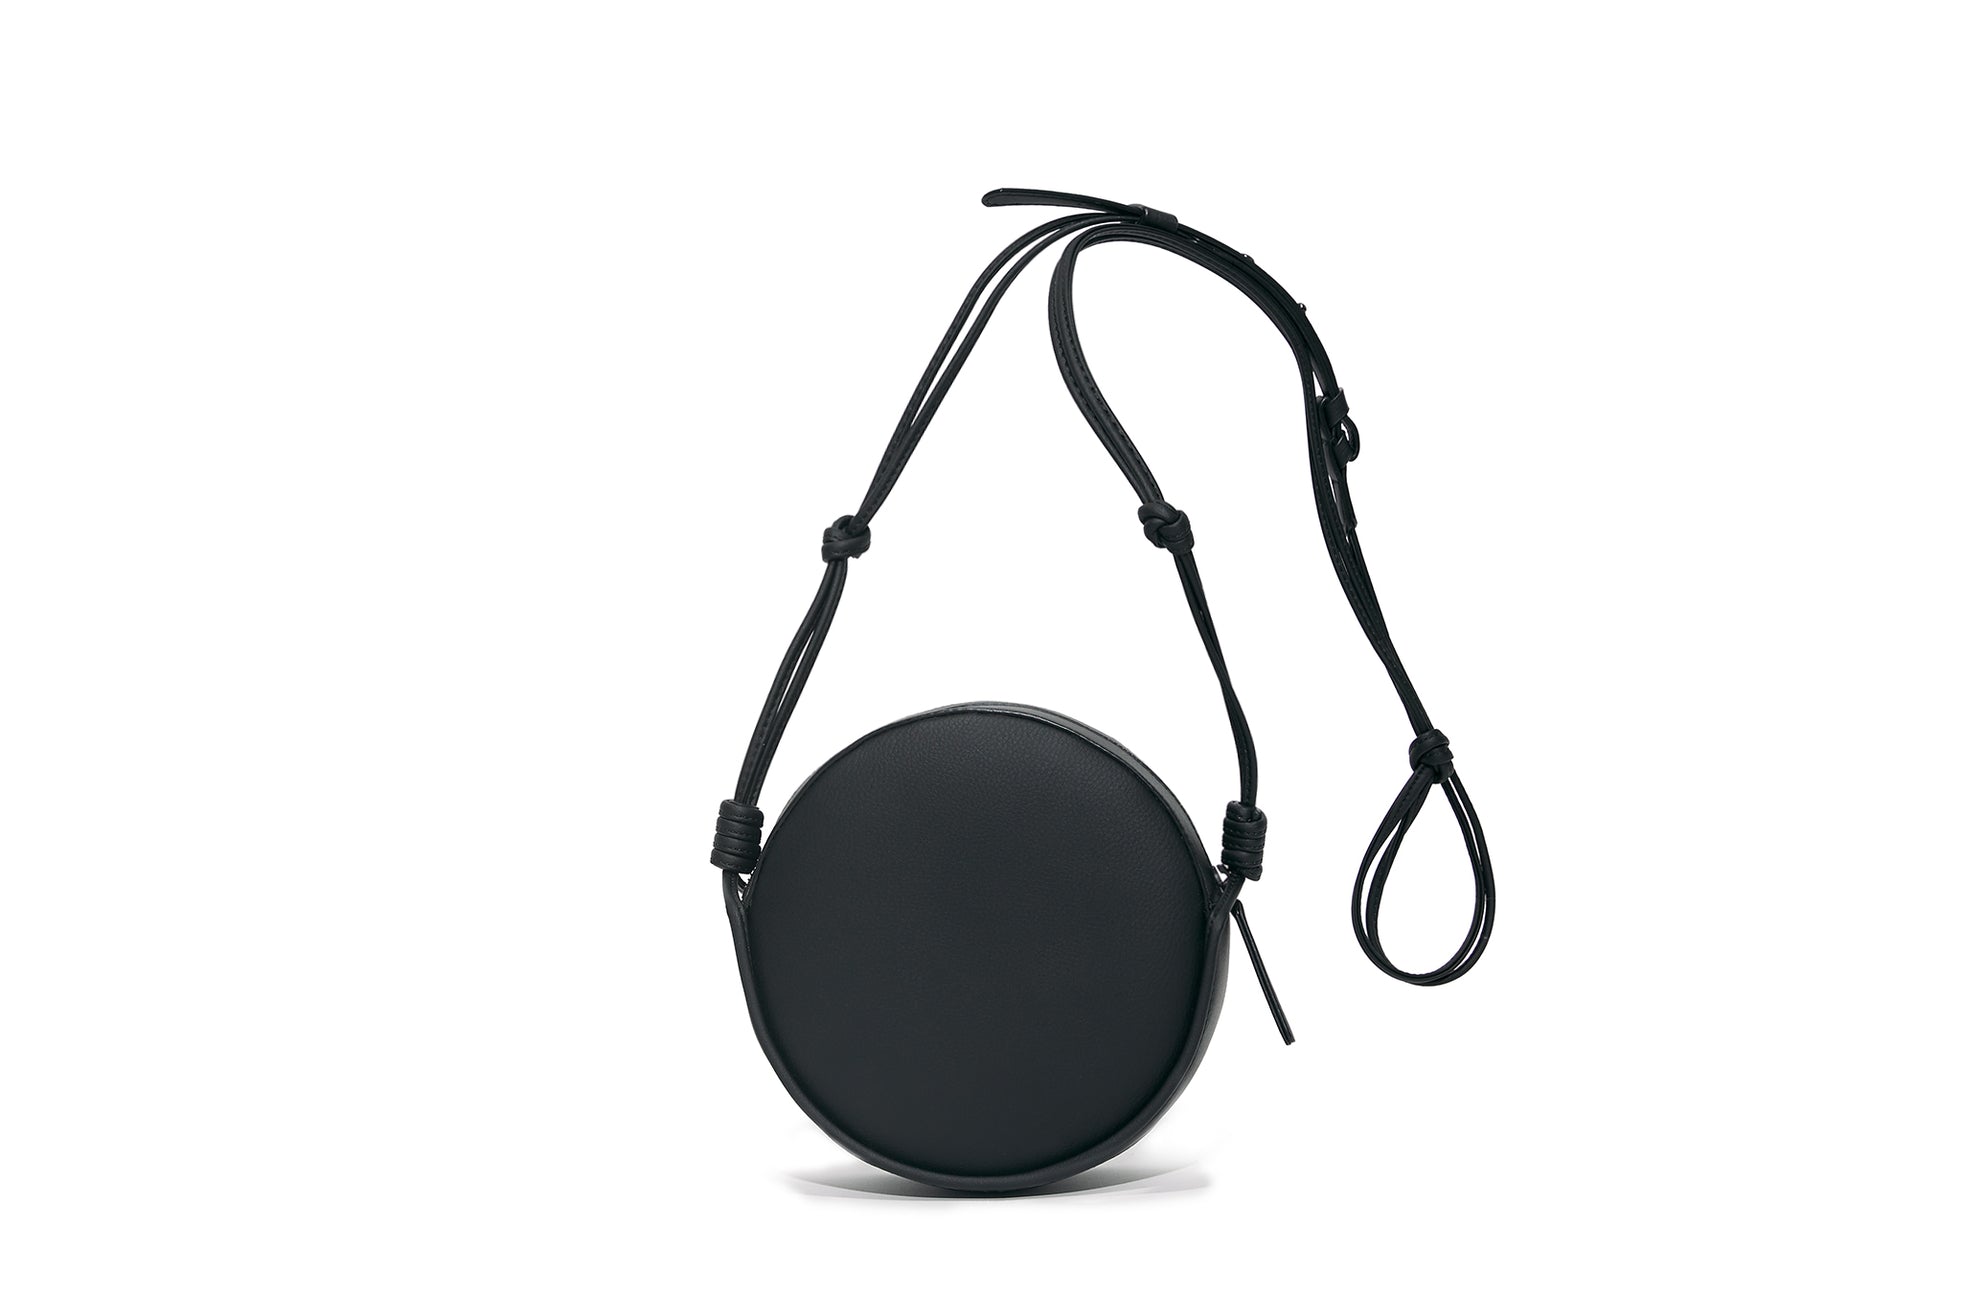 The Circle Crossbody in Banbū Leather in Black image 4